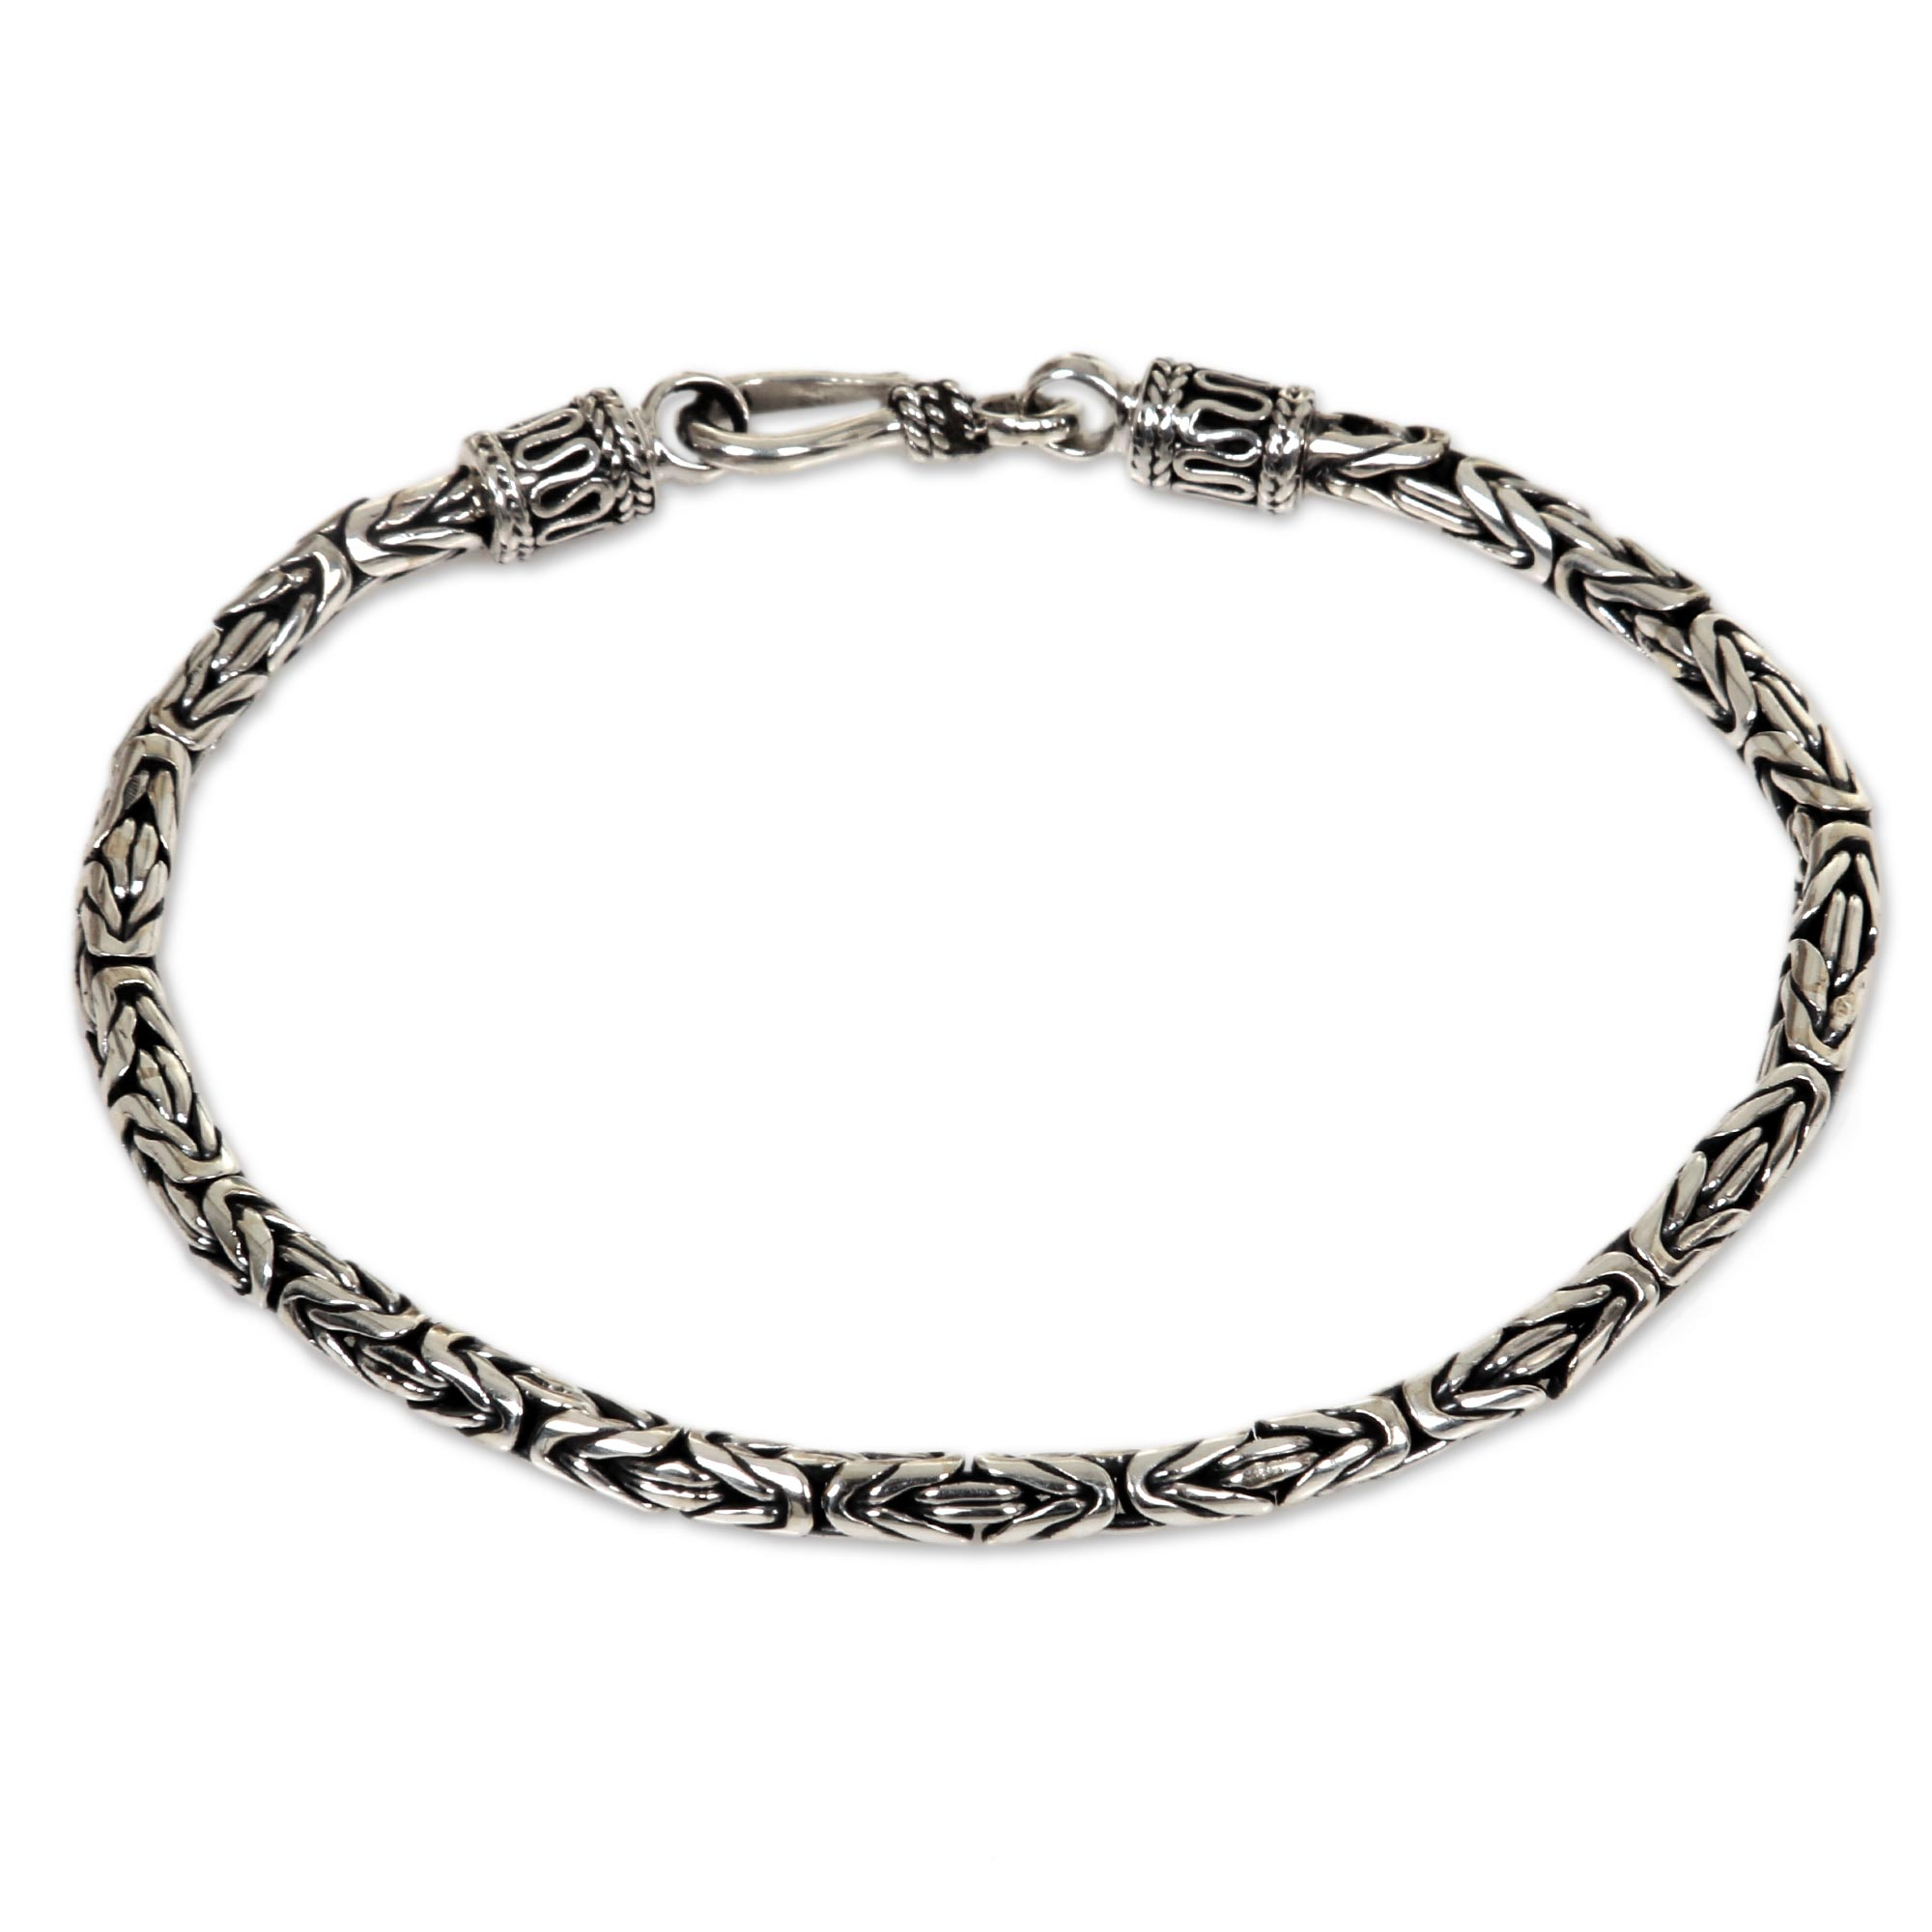 Hand Made Sterling Silver Chain Bracelet - Borobudur Collection | NOVICA